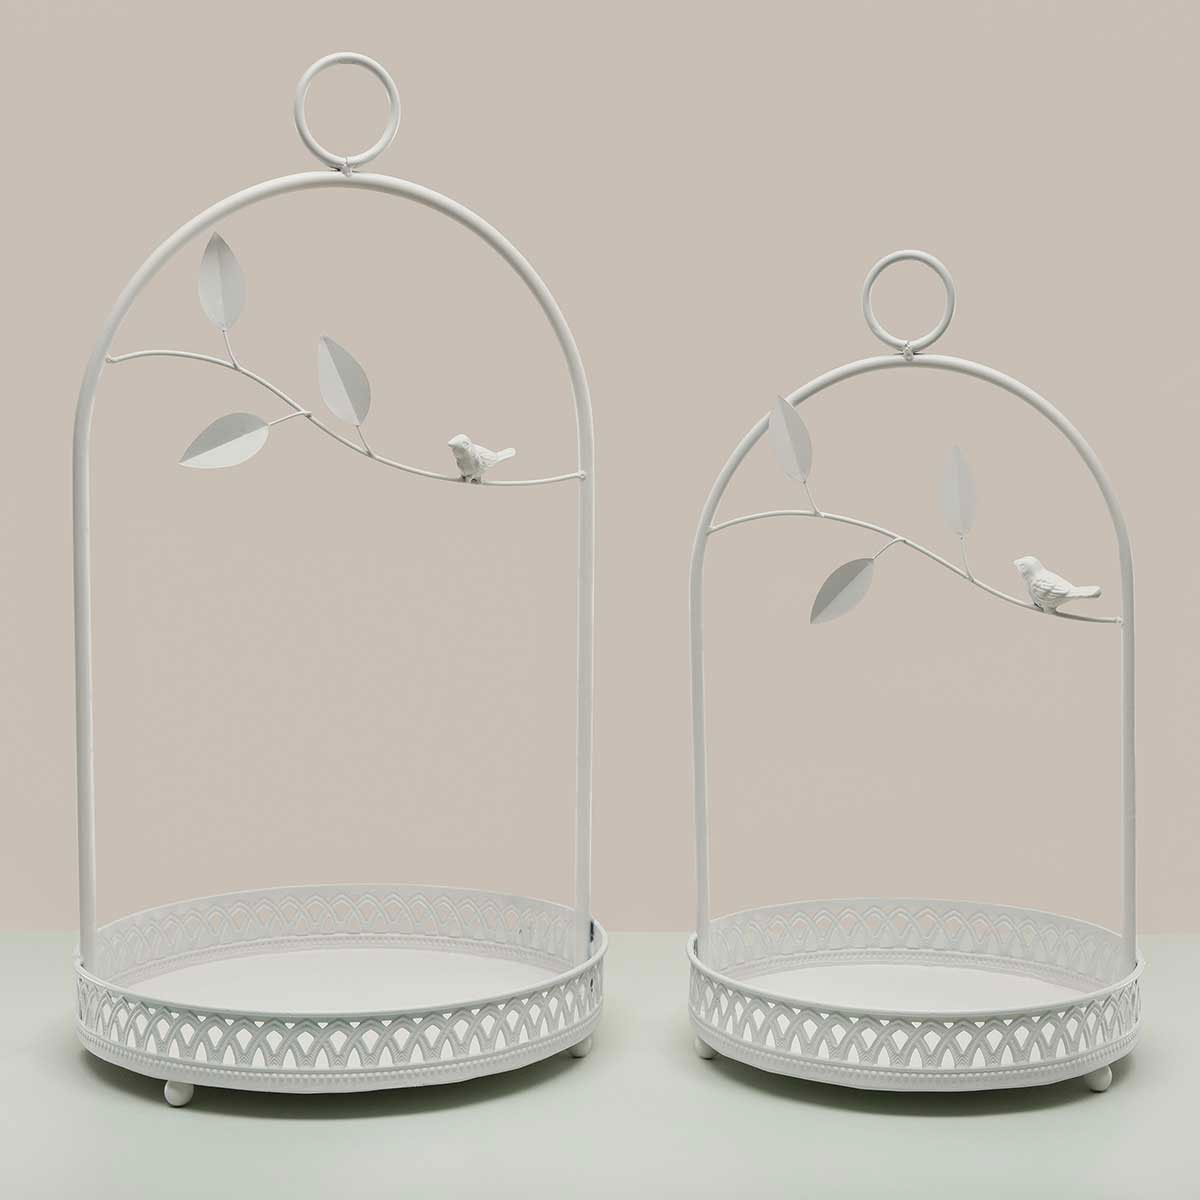 TABLE TRAY BIRD/LEAF LARGE 11.75IN X 21.25IN MATTE WHITE METAL